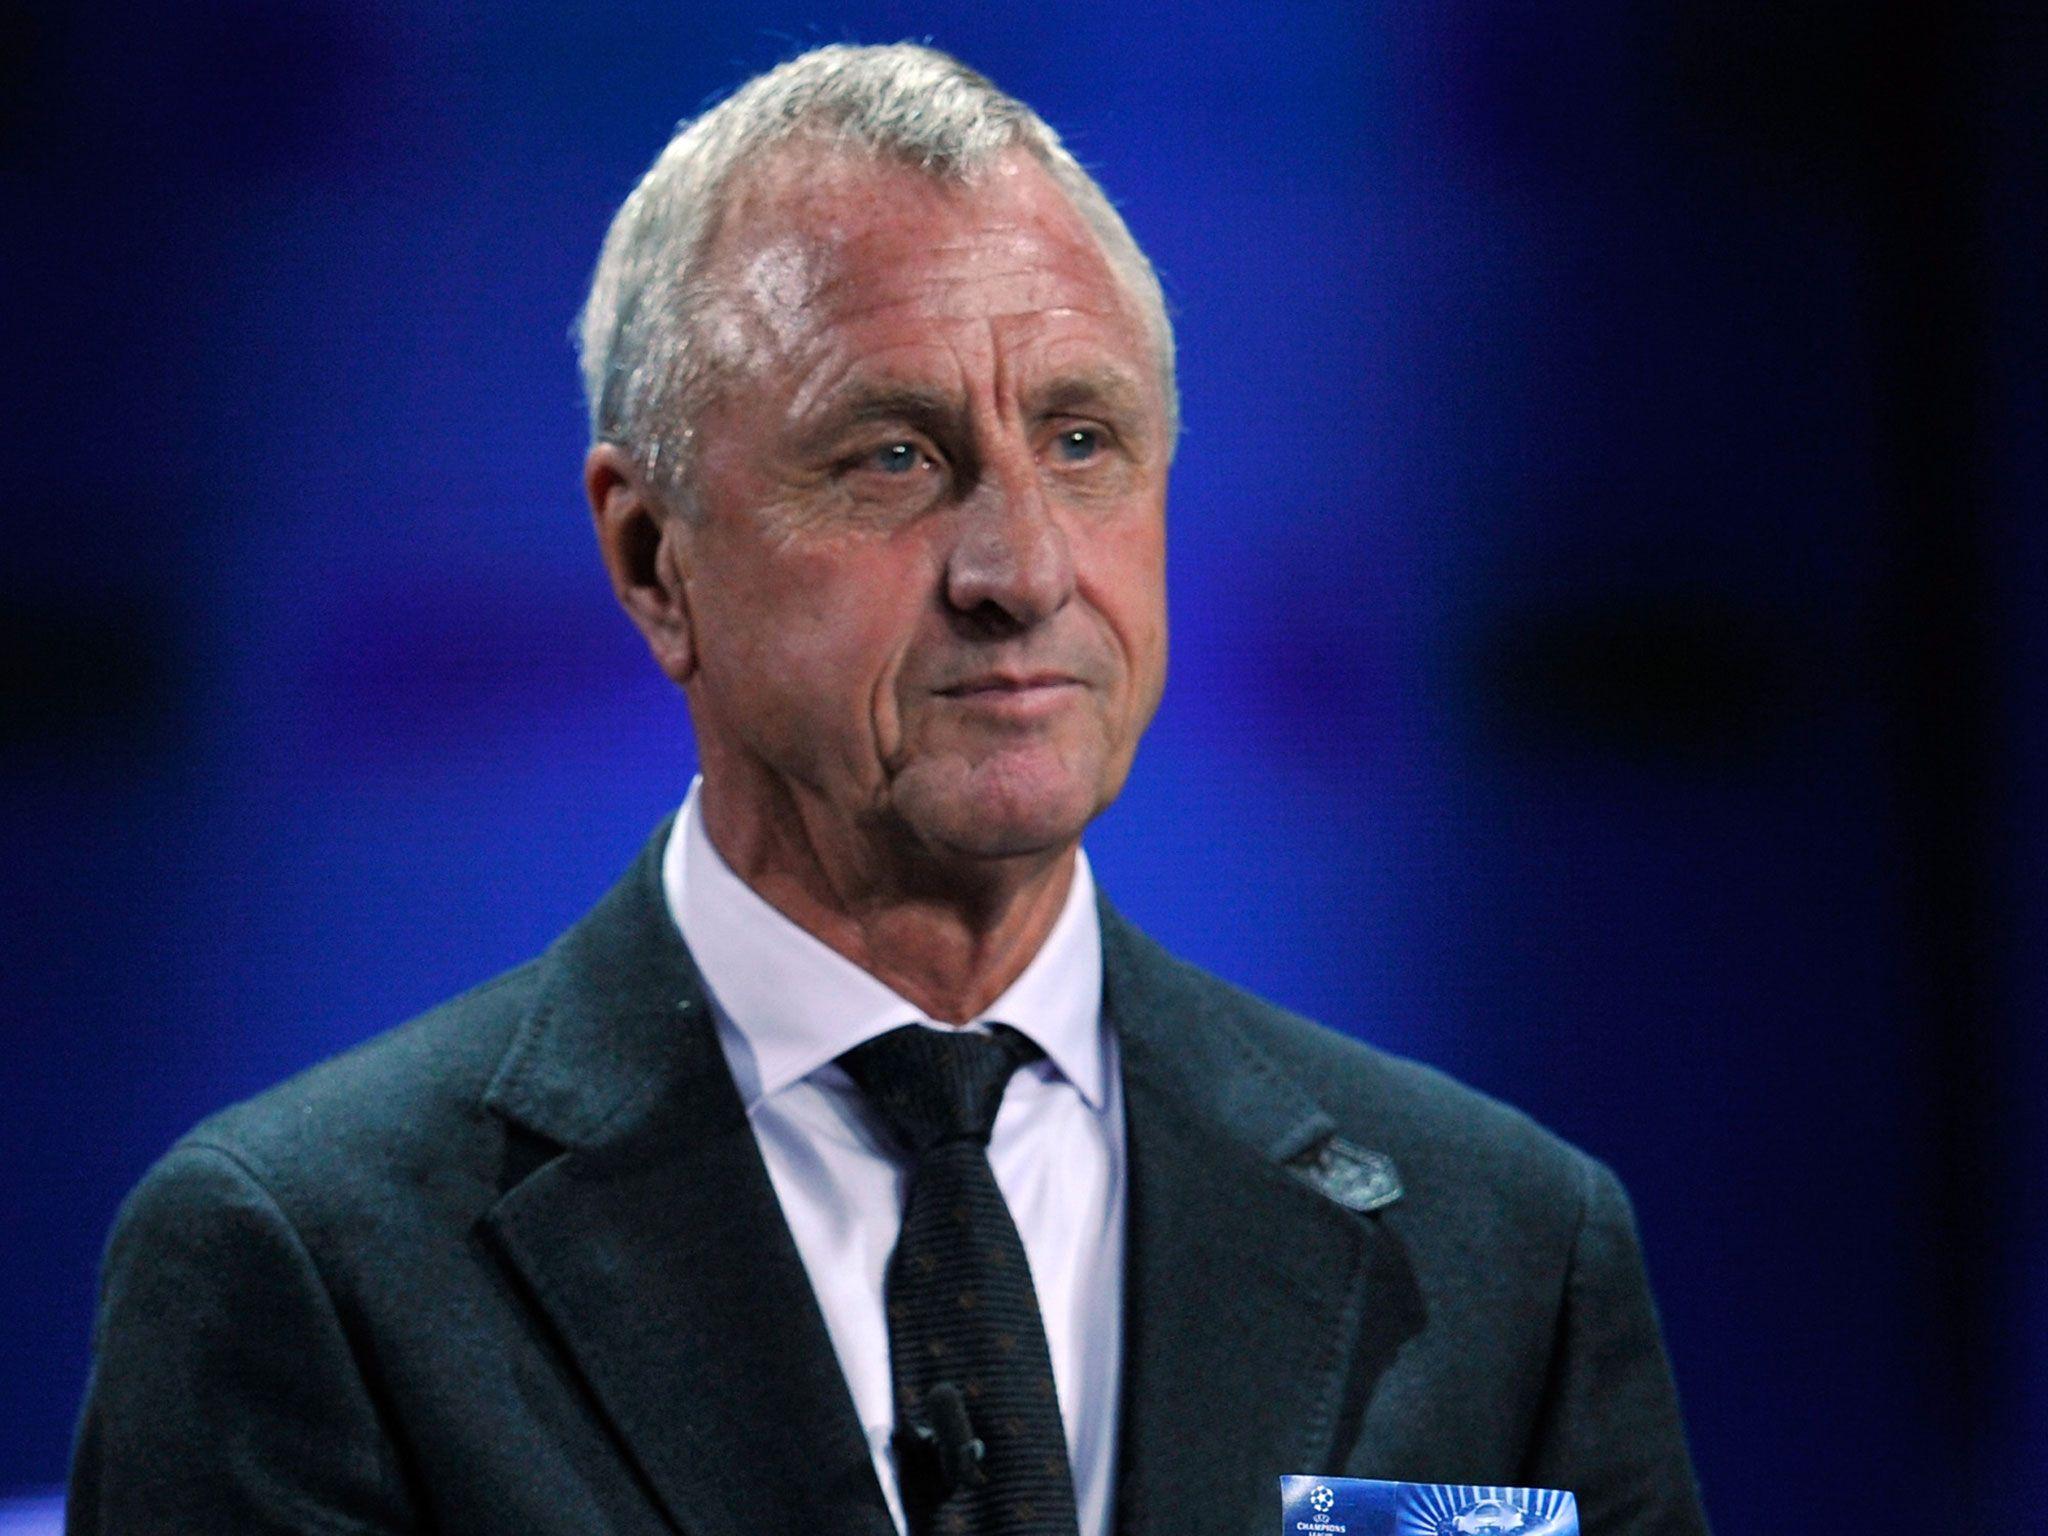 Barcelona legend Johan Cruyff reveals 'disappointment' that lung